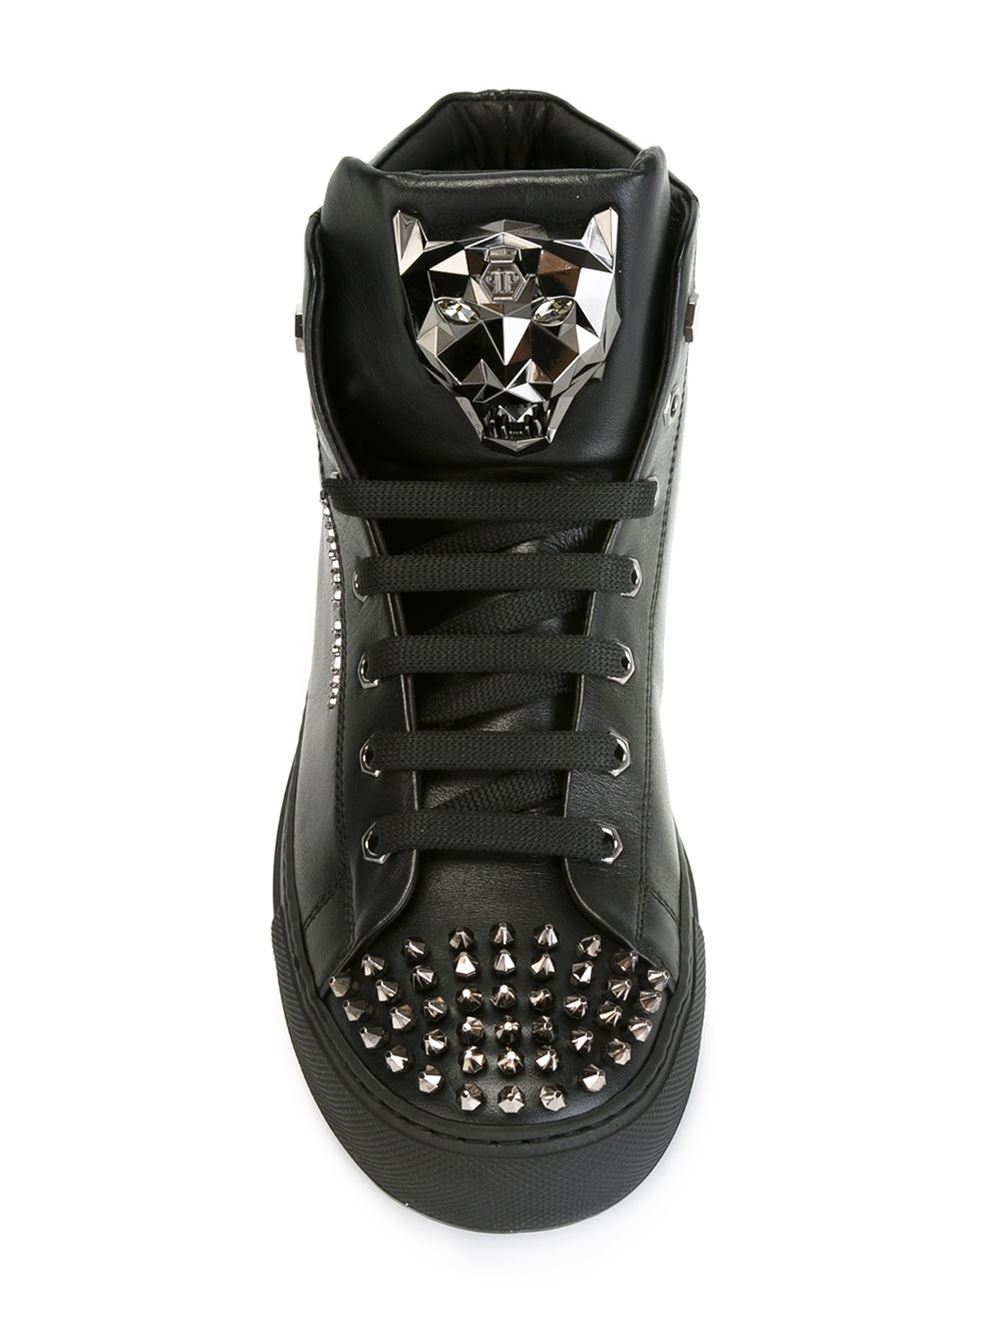 Philipp Plein Spike-Studded Leather High-Top Sneakers in Black for Men -  Lyst